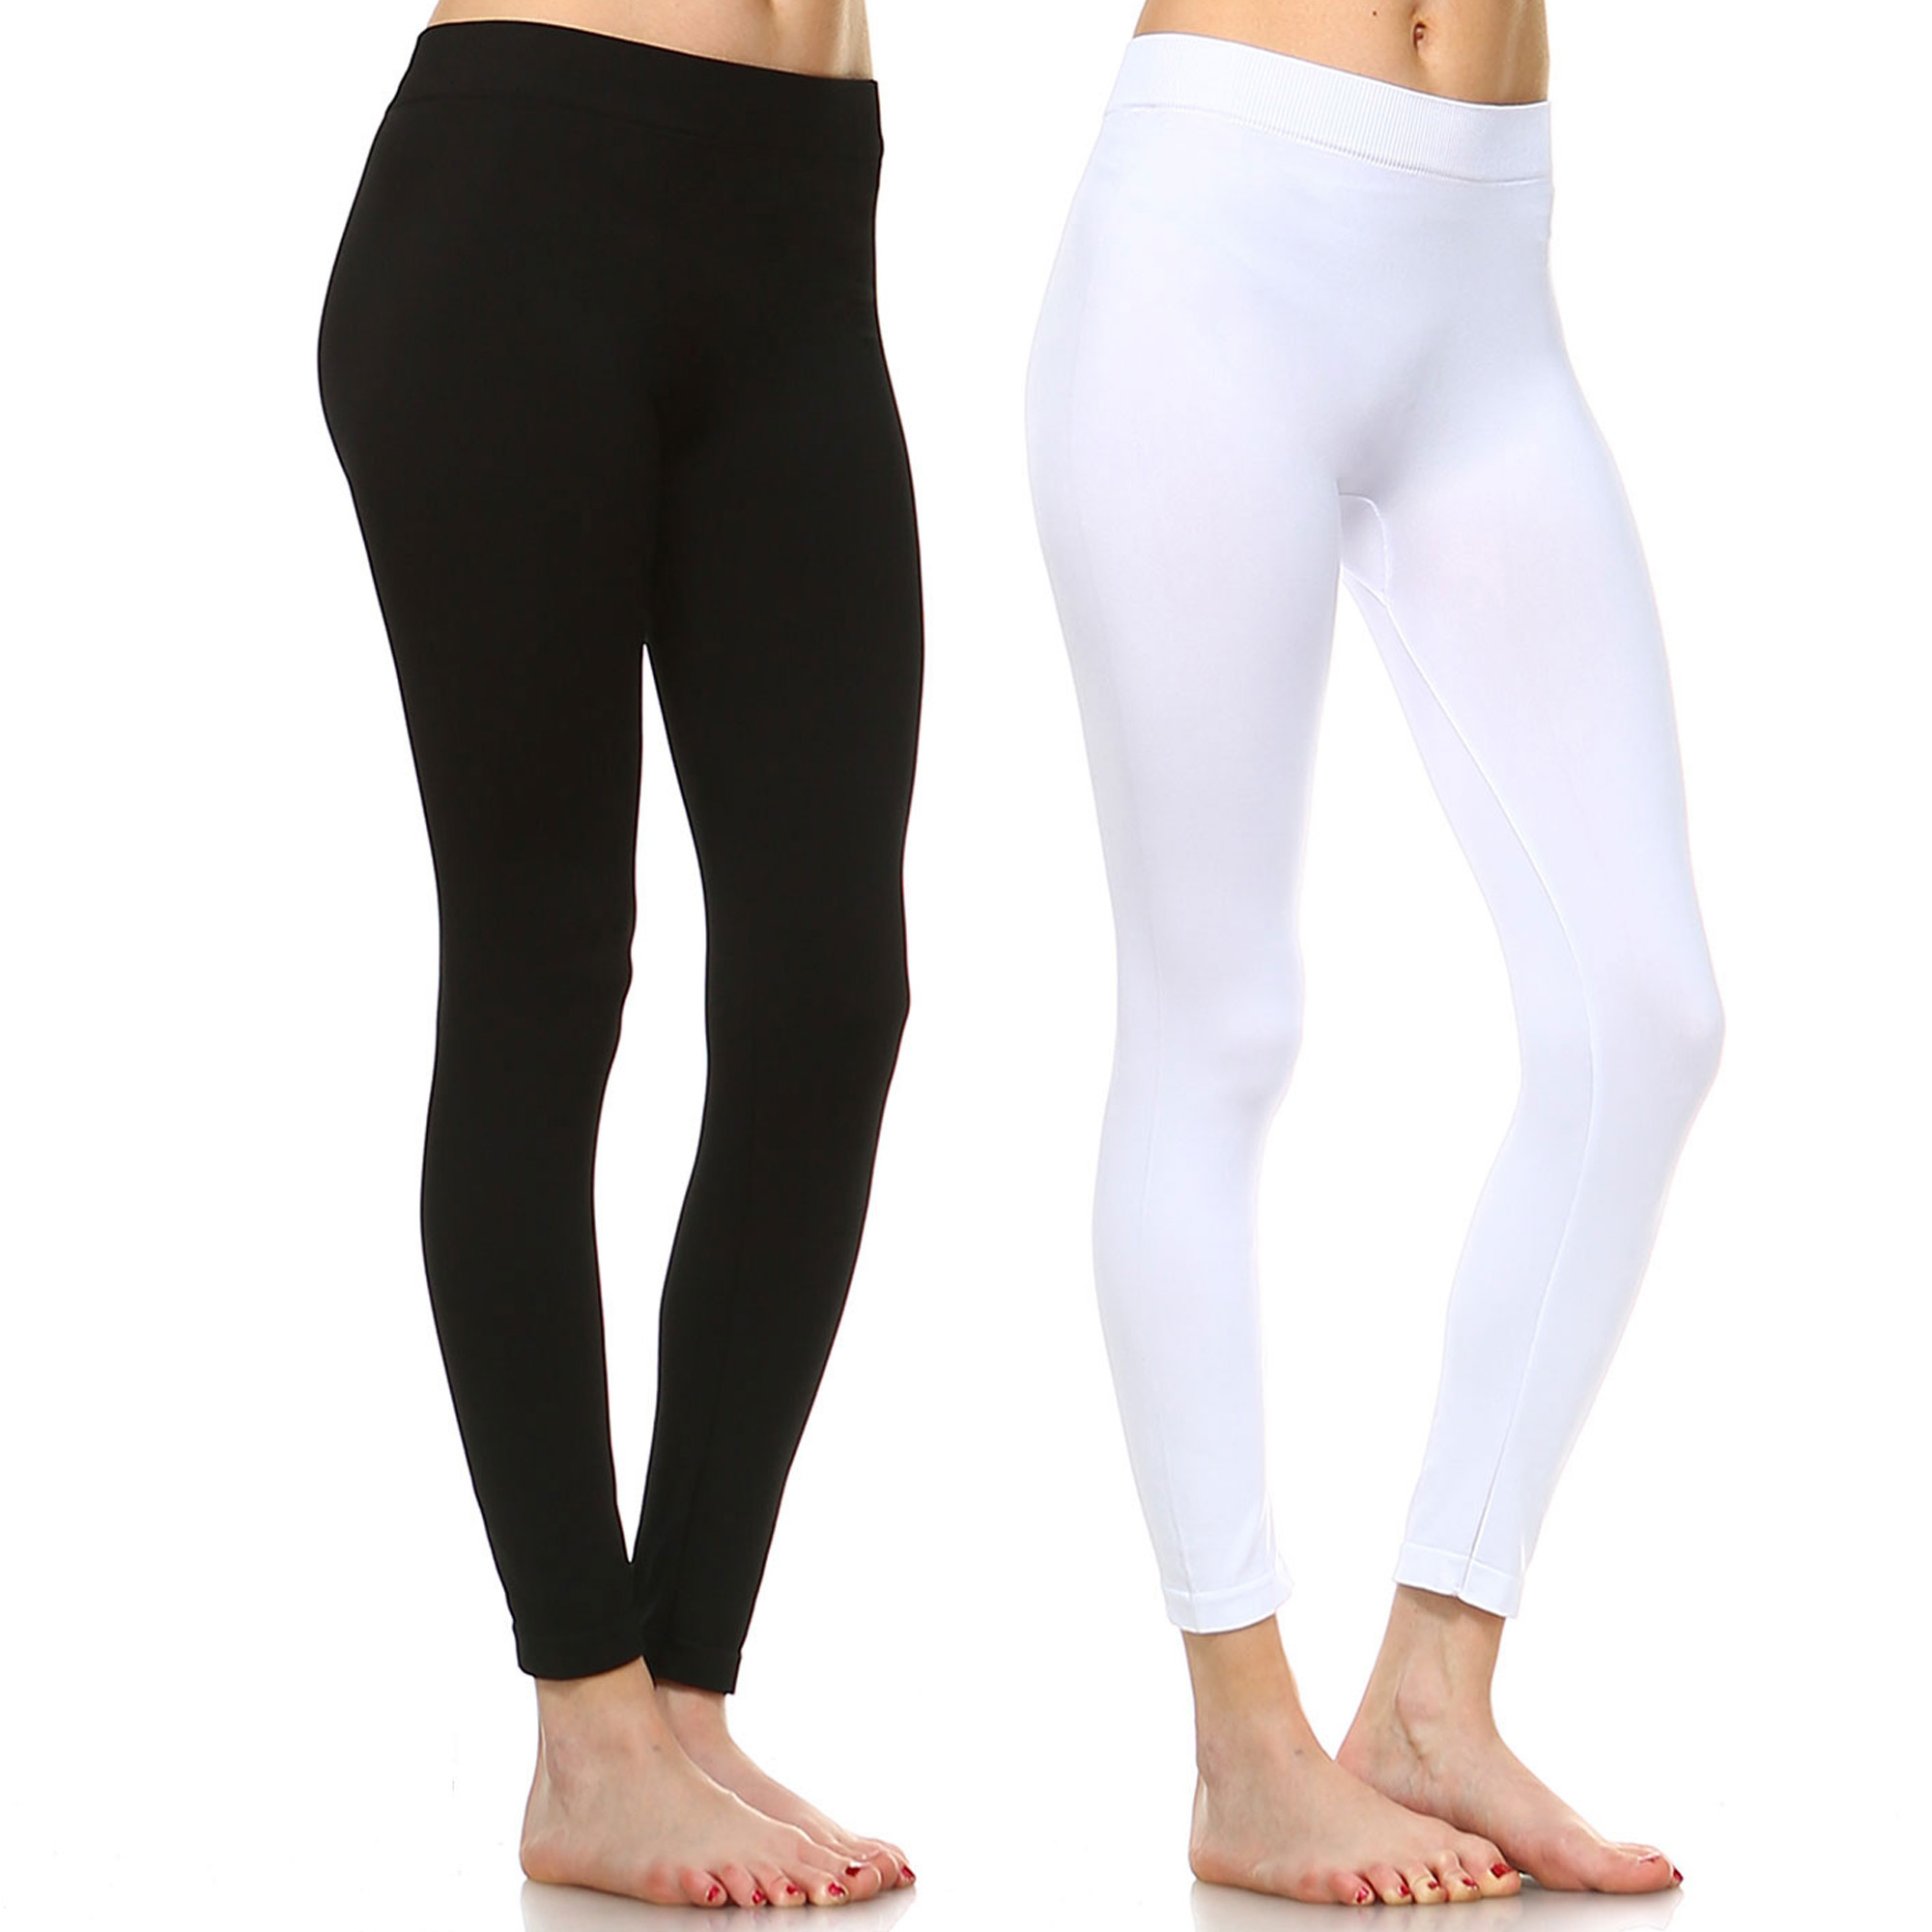 White Mark Women's Pack Of 2 Solid Color Leggings - Black, Brown, One Size - Missy